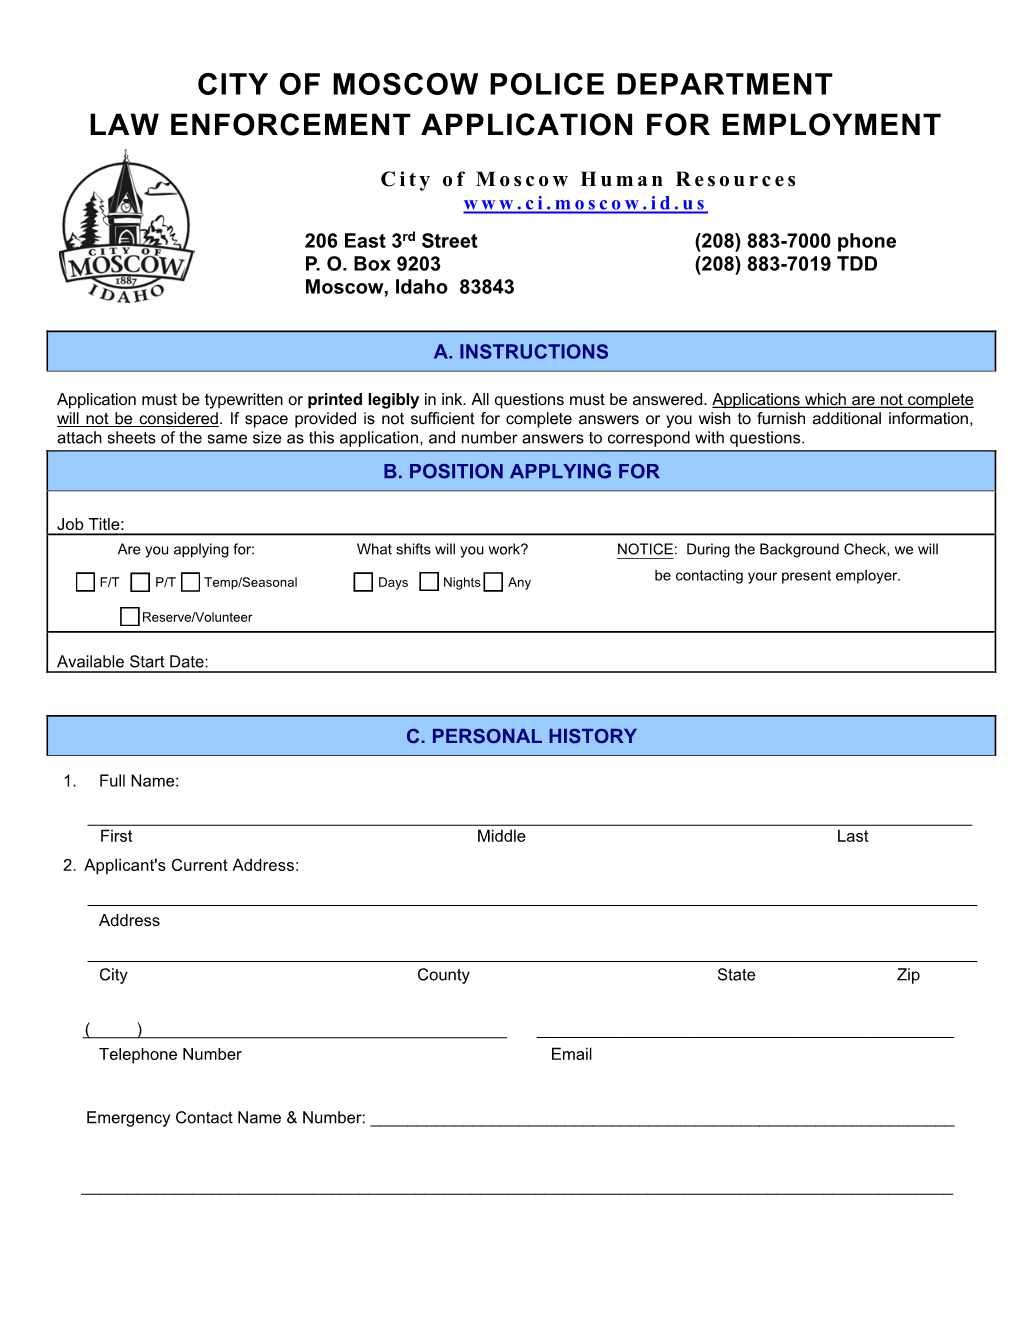 City of Moscow Police Department Law Enforcement Application for Employment